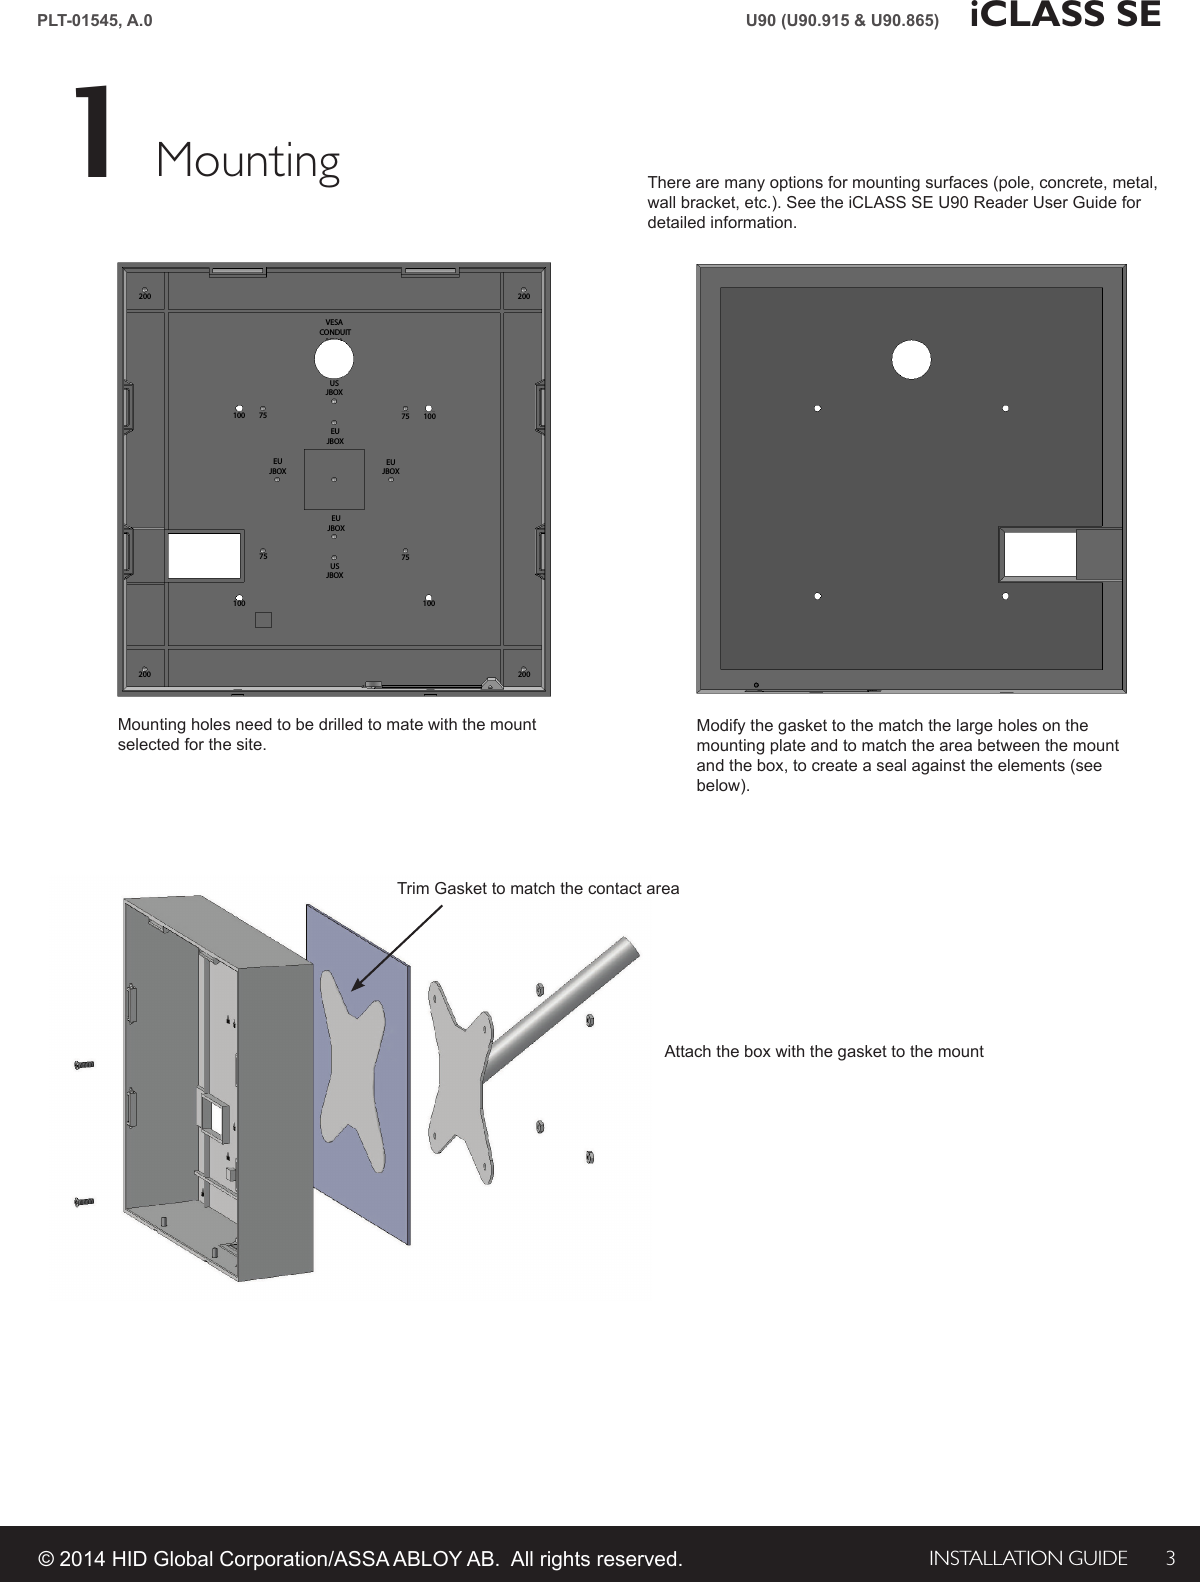 INSTALLATION GUIDE 3PLT-01545, A.0 iCLASS SEU90 (U90.915 &amp; U90.865)© 2014 HID Global Corporation/ASSA ABLOY AB.  All rights reserved.Mounting1There are many options for mounting surfaces (pole, concrete, metal, wall bracket, etc.). See the iCLASS SE U90 Reader User Guide for detailed information.100 75VESA CONDUITUSJBOXEUJBOXEUJBOXEUJBOXEUJBOXUSJBOX75 1007510075100200200 200200Mounting holes need to be drilled to mate with the mount selected for the site.Modify the gasket to the match the large holes on the mounting plate and to match the area between the mount and the box, to create a seal against the elements (see below).Attach the box with the gasket to the mountTrim Gasket to match the contact area